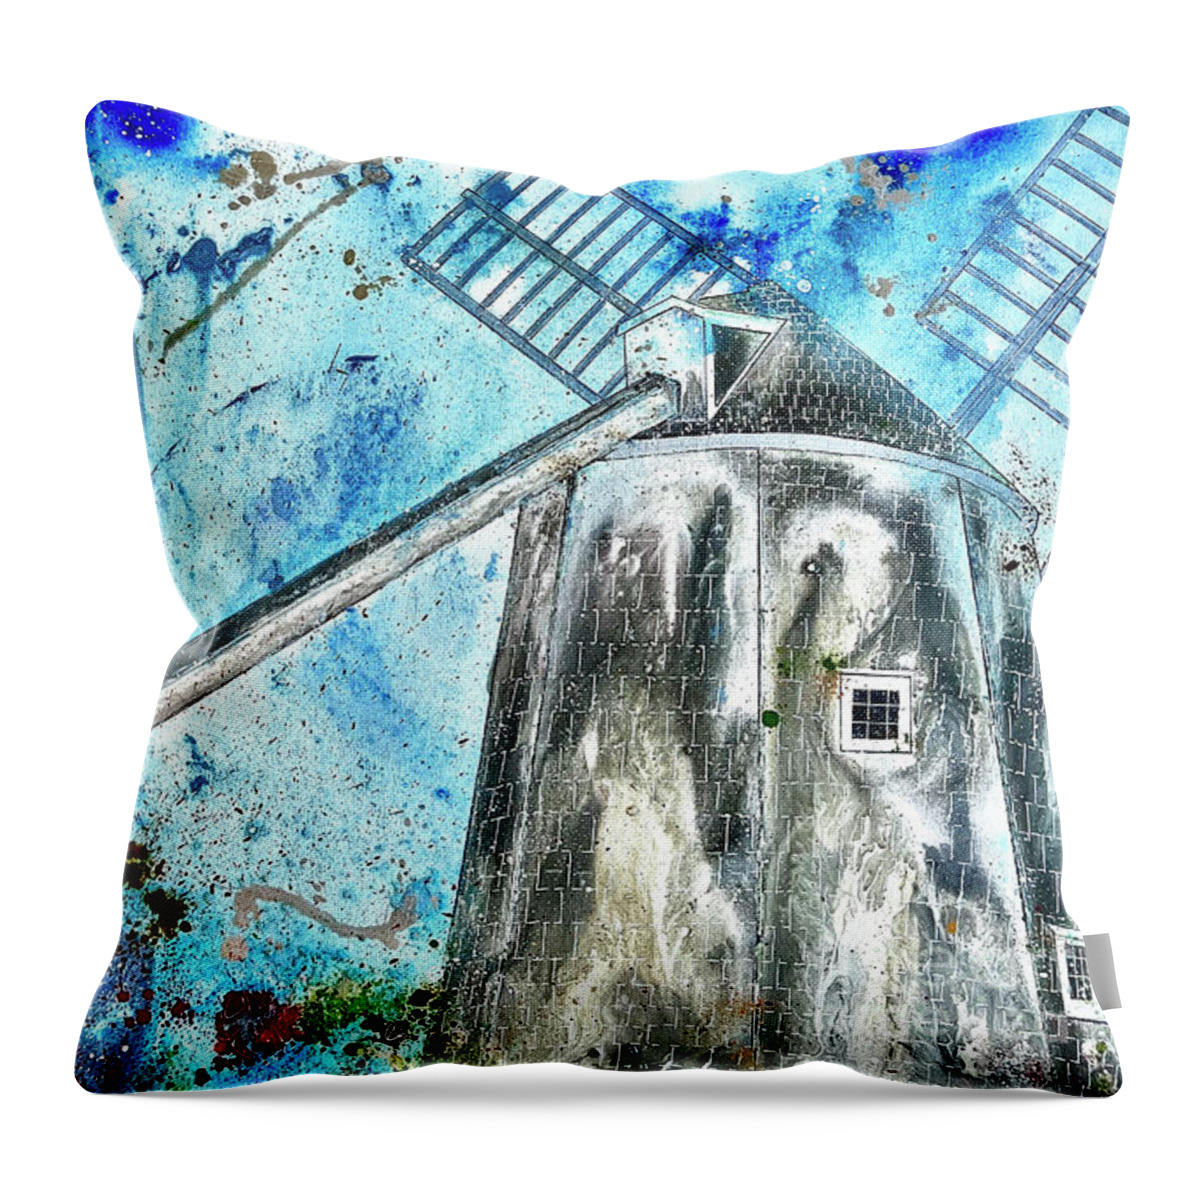 Cape Cod Windmill Throw Pillow featuring the painting Wheelin' by Kasha Ritter